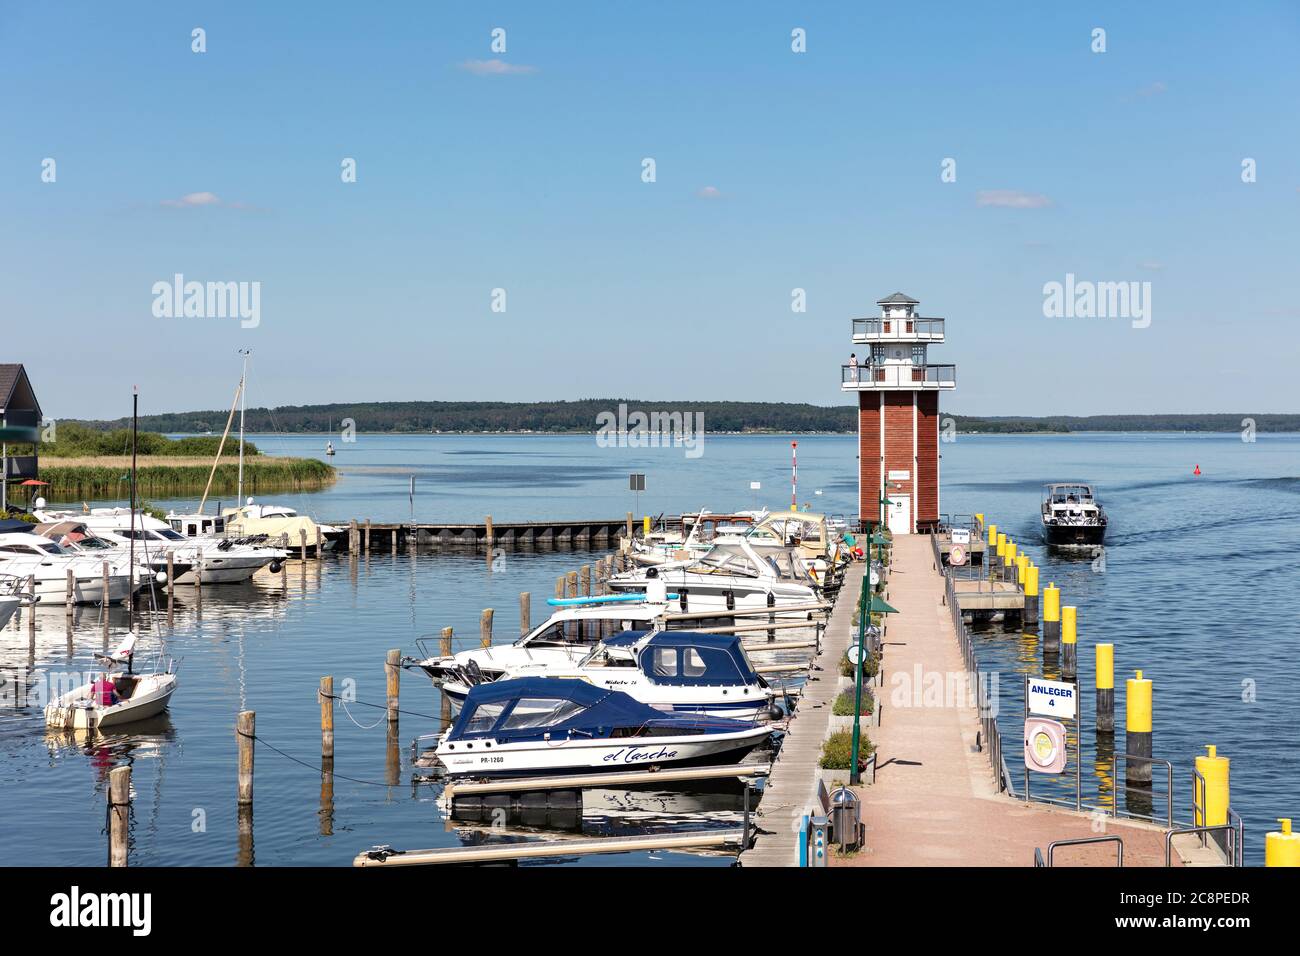 observation tower in the harbor of Plau am See, Germany Stock Photo